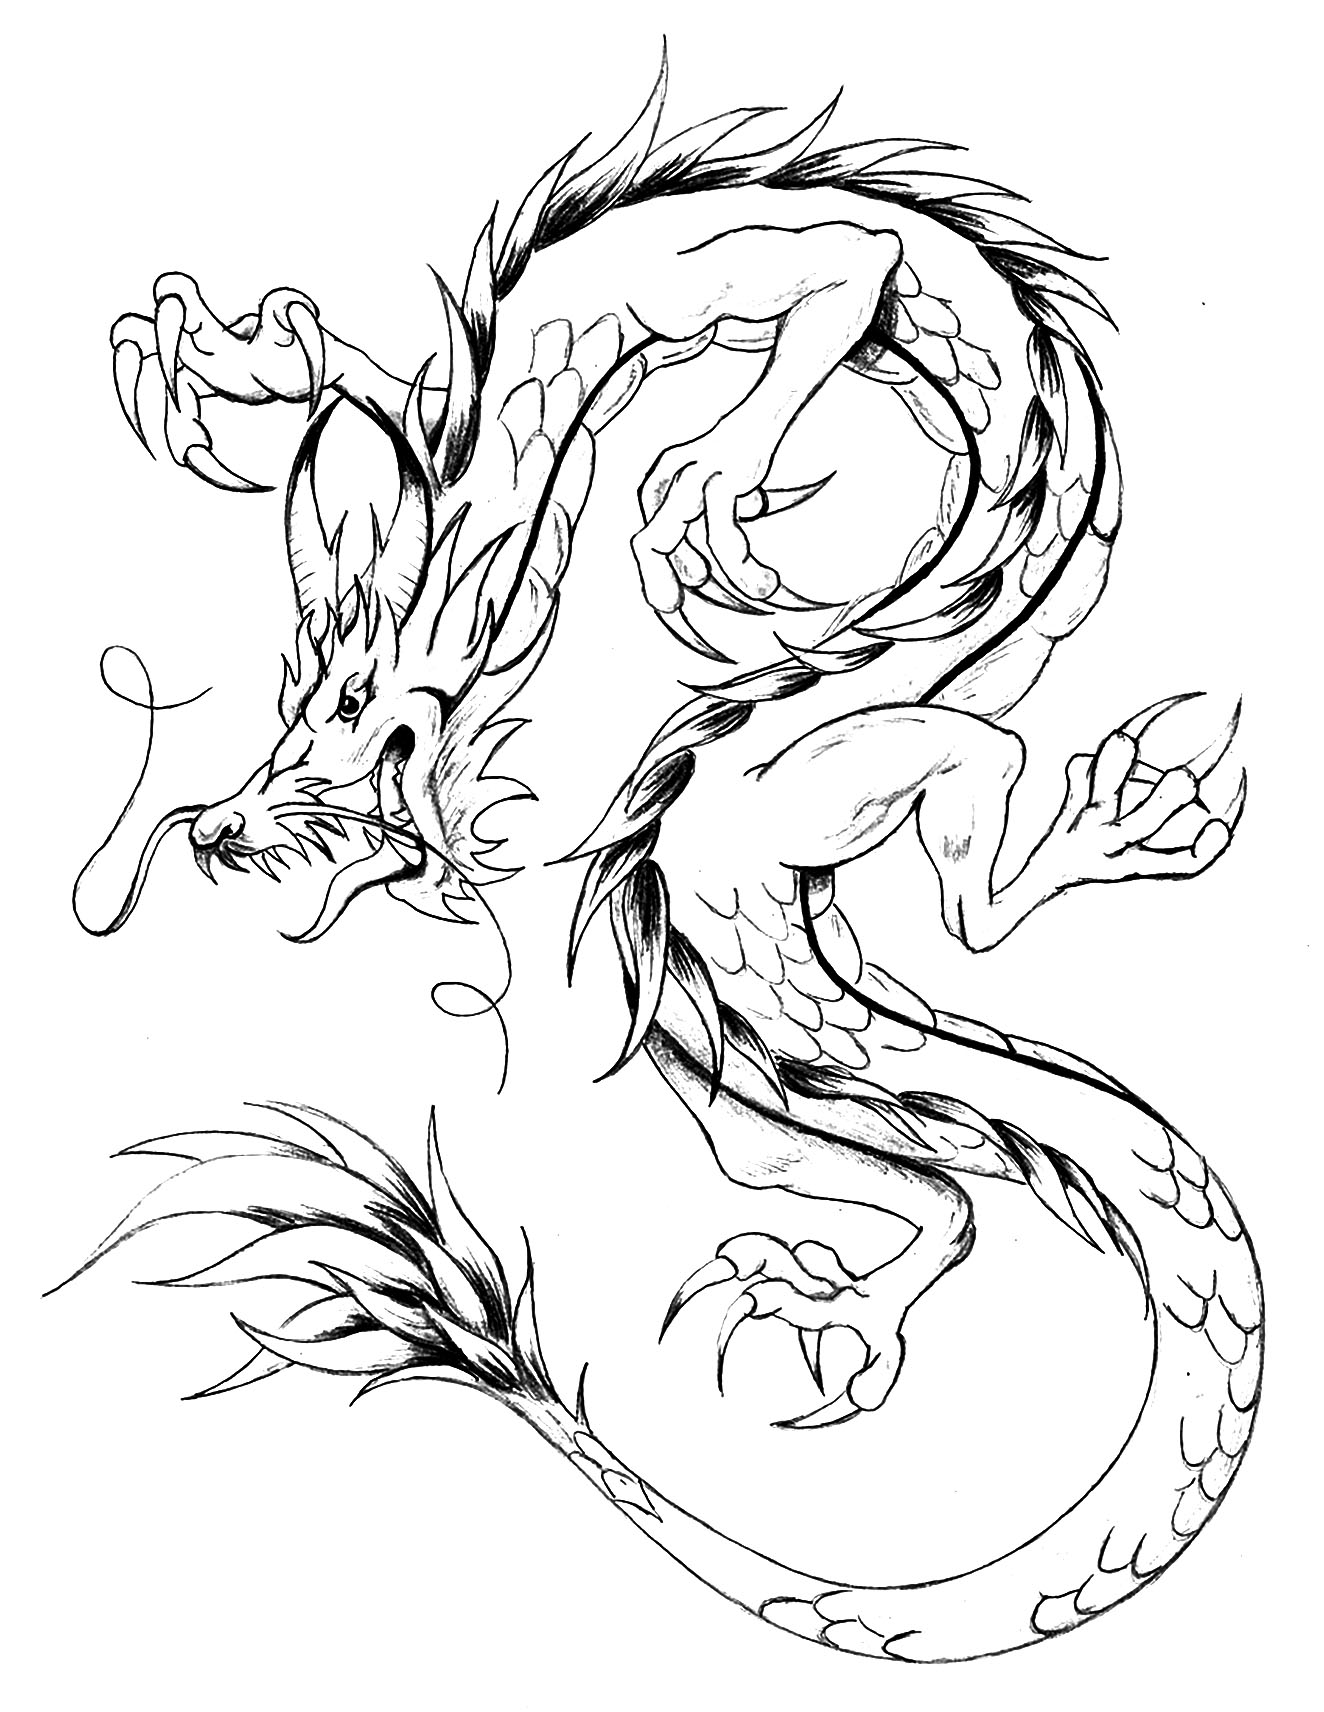 Dragon asian style - Dragons Adult Coloring Pages